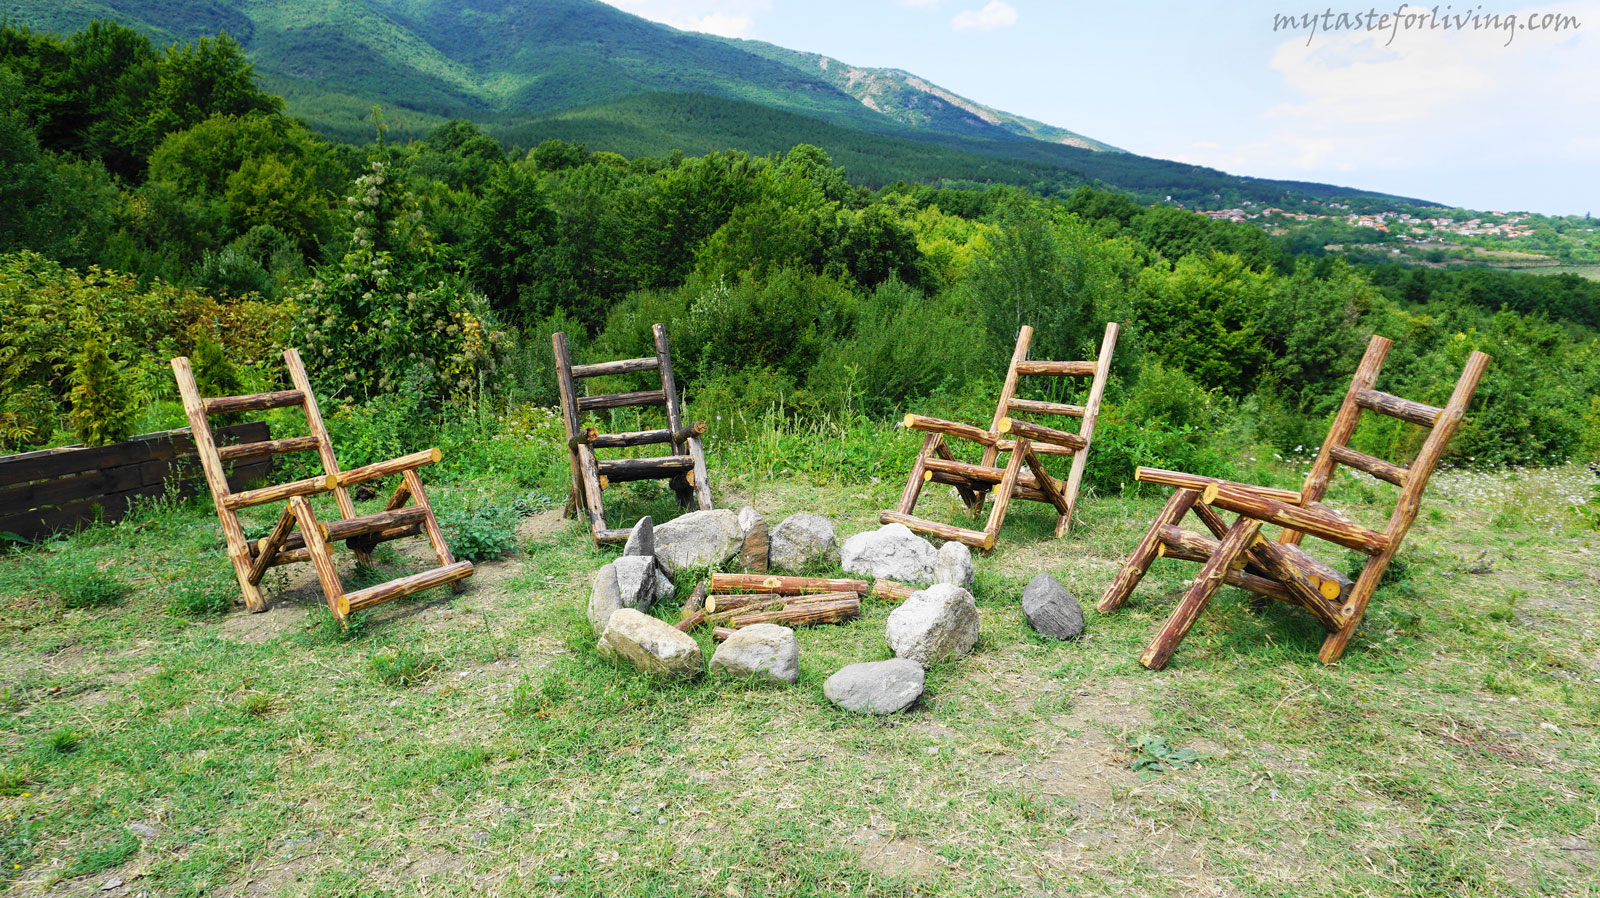 Ranch "Wild City" is another place in Bulgaria, made with love and desire, so you will be happy to be there and want to visit it again. 